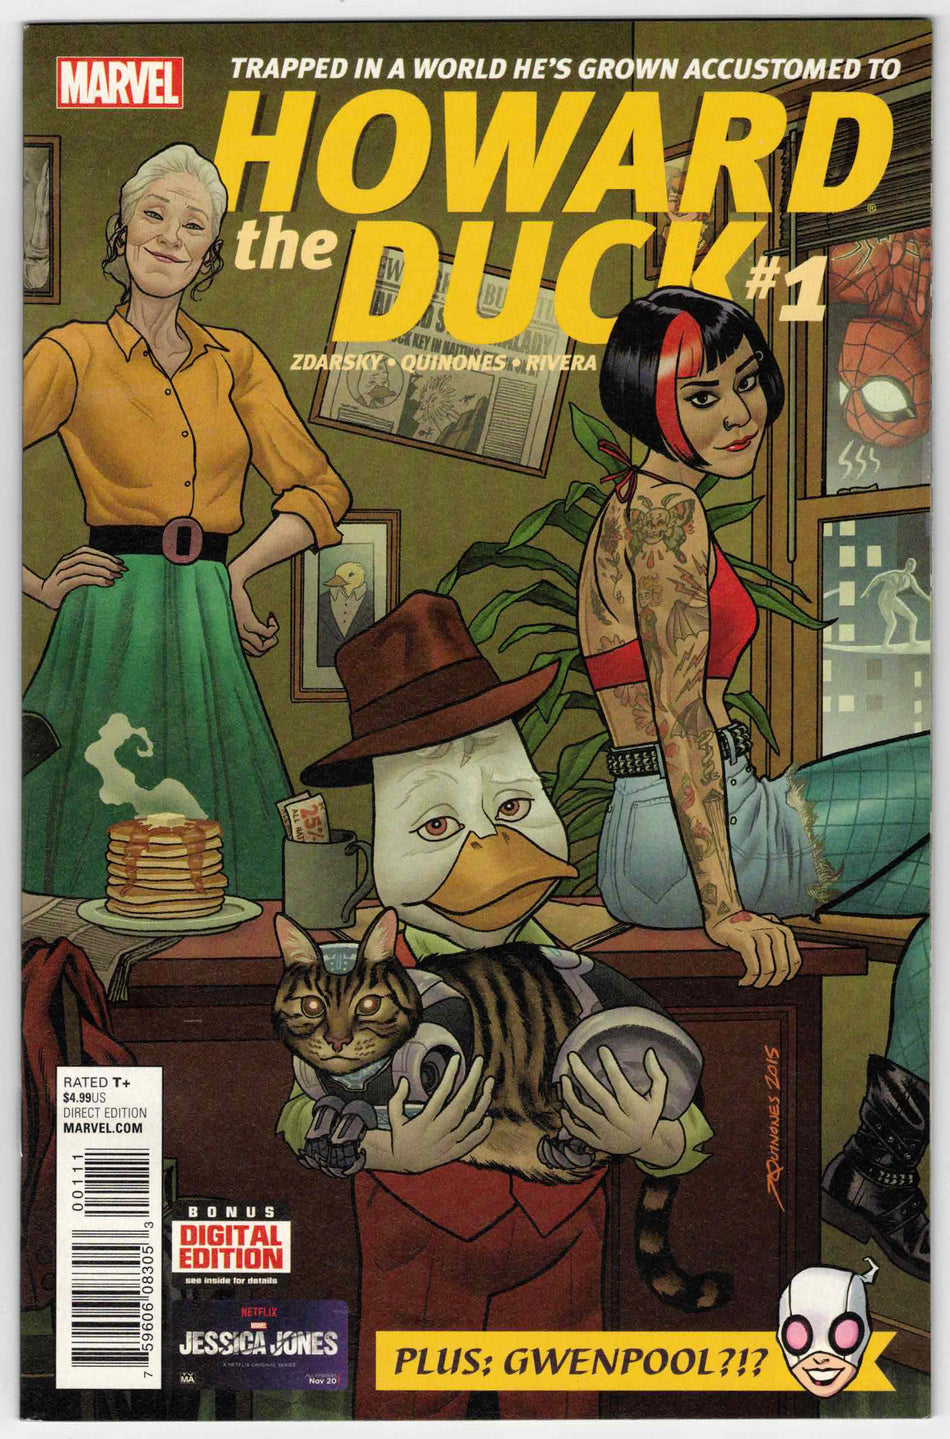 Howard the Duck, Vol. 5 (2015) Issue 1A - Near Mint